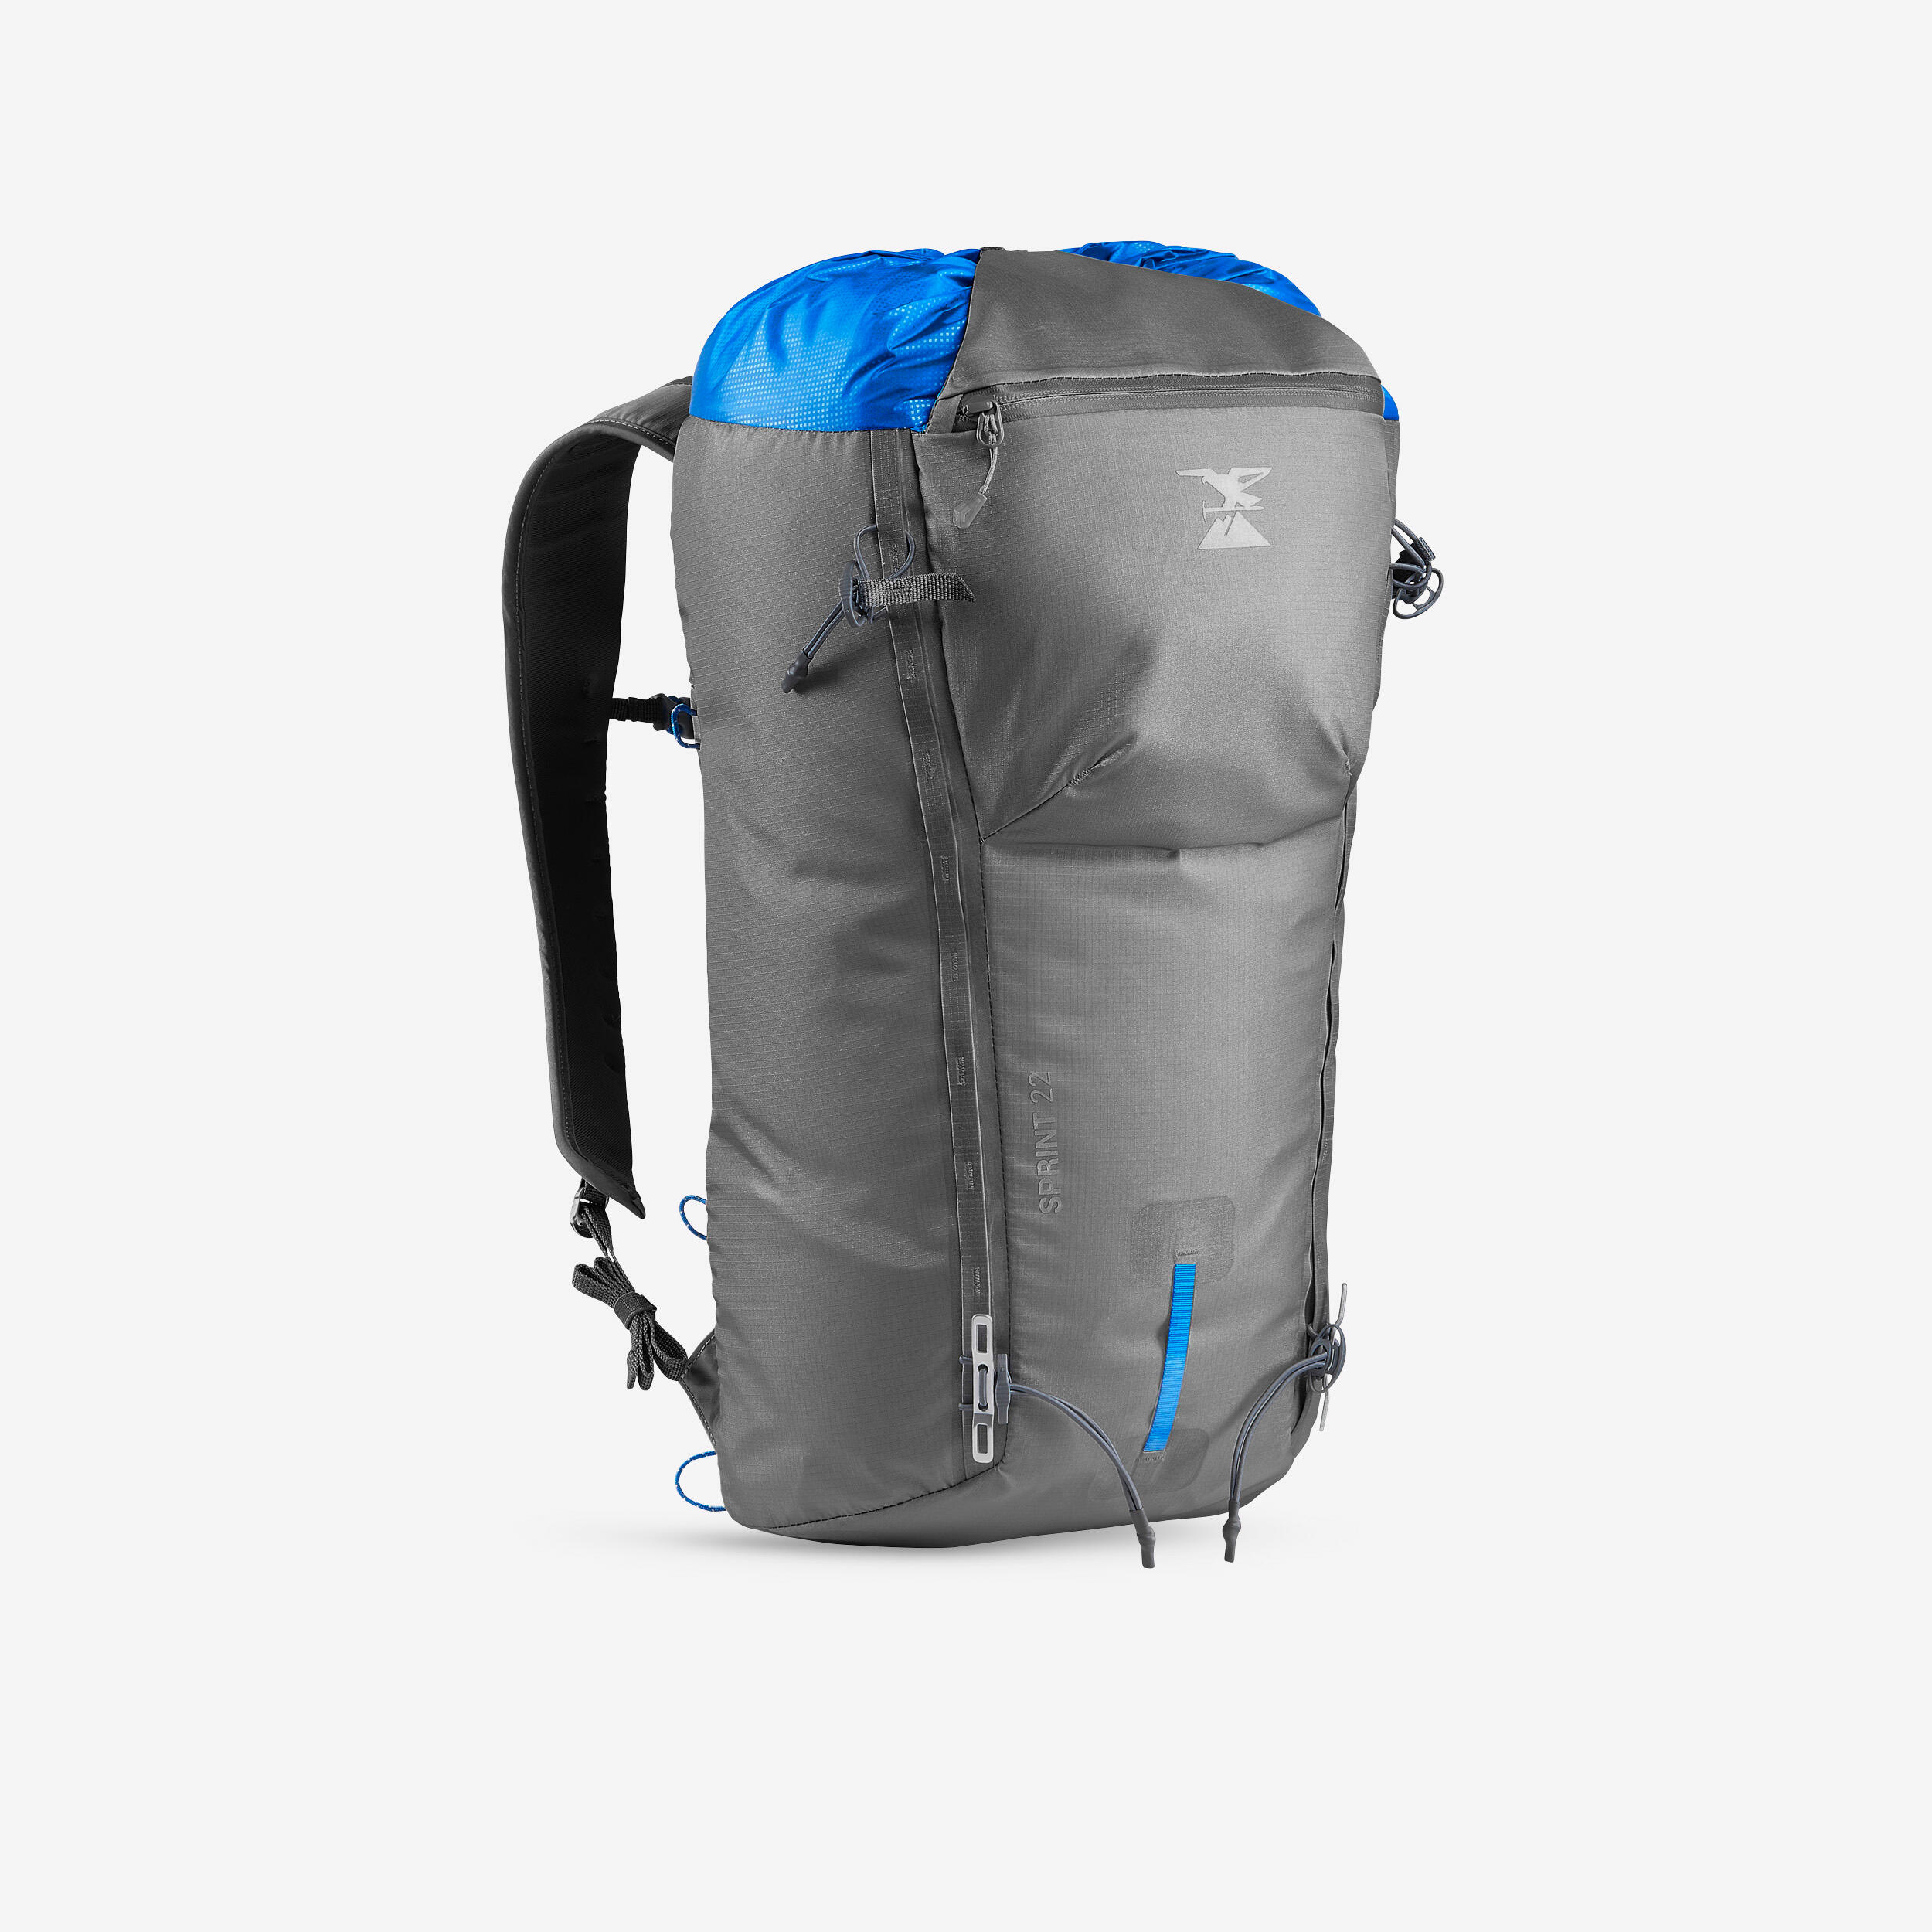 SIMOND Mountaineering Backpack 22 Litres - Sprint 22 Grey